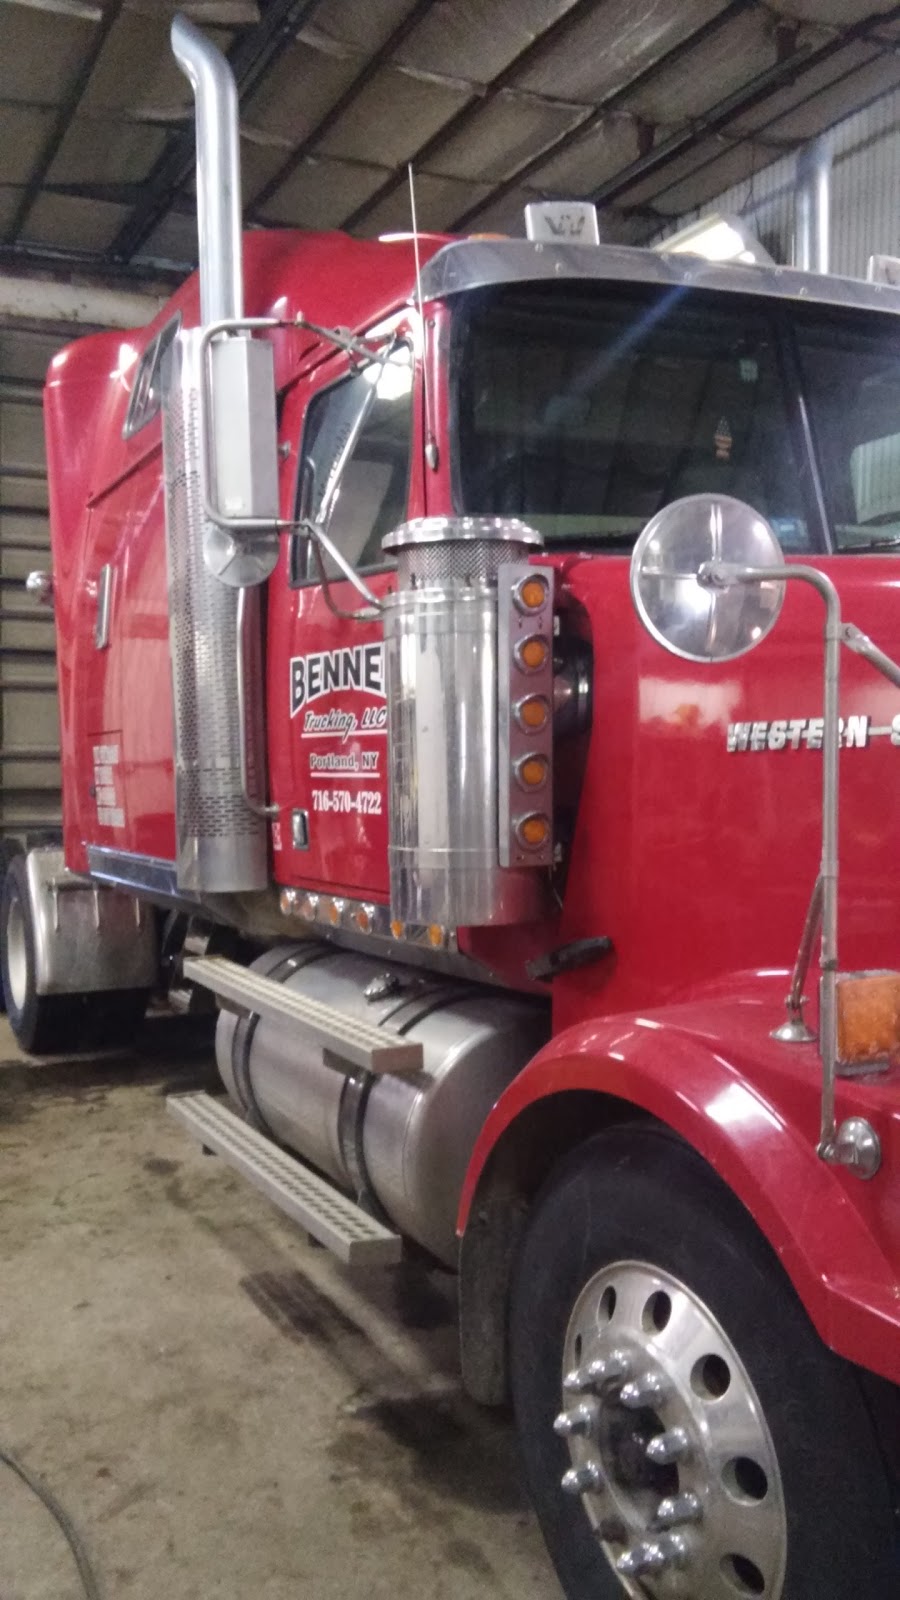 Benner Trucking | 8290 Campbell Rd, Portland, NY 14769, USA | Phone: (716) 570-4722